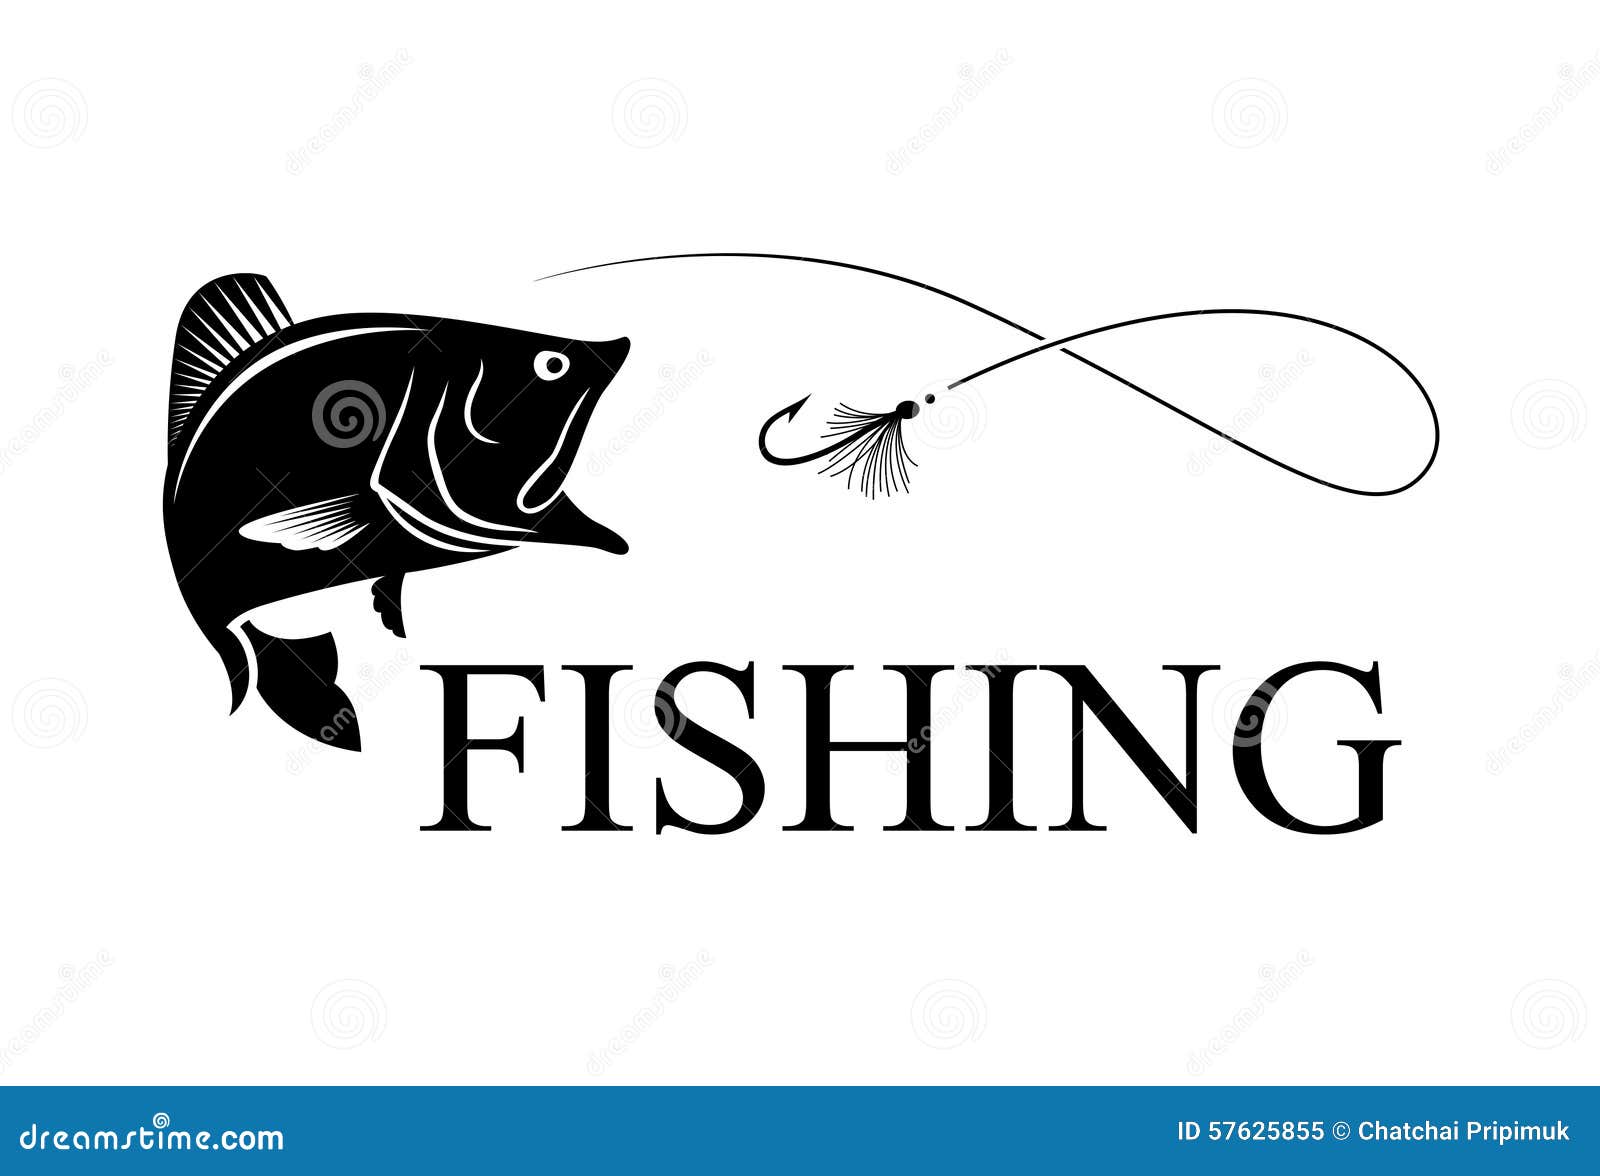 Fishing bass stock vector. Illustration of bass, graphic - 57625855